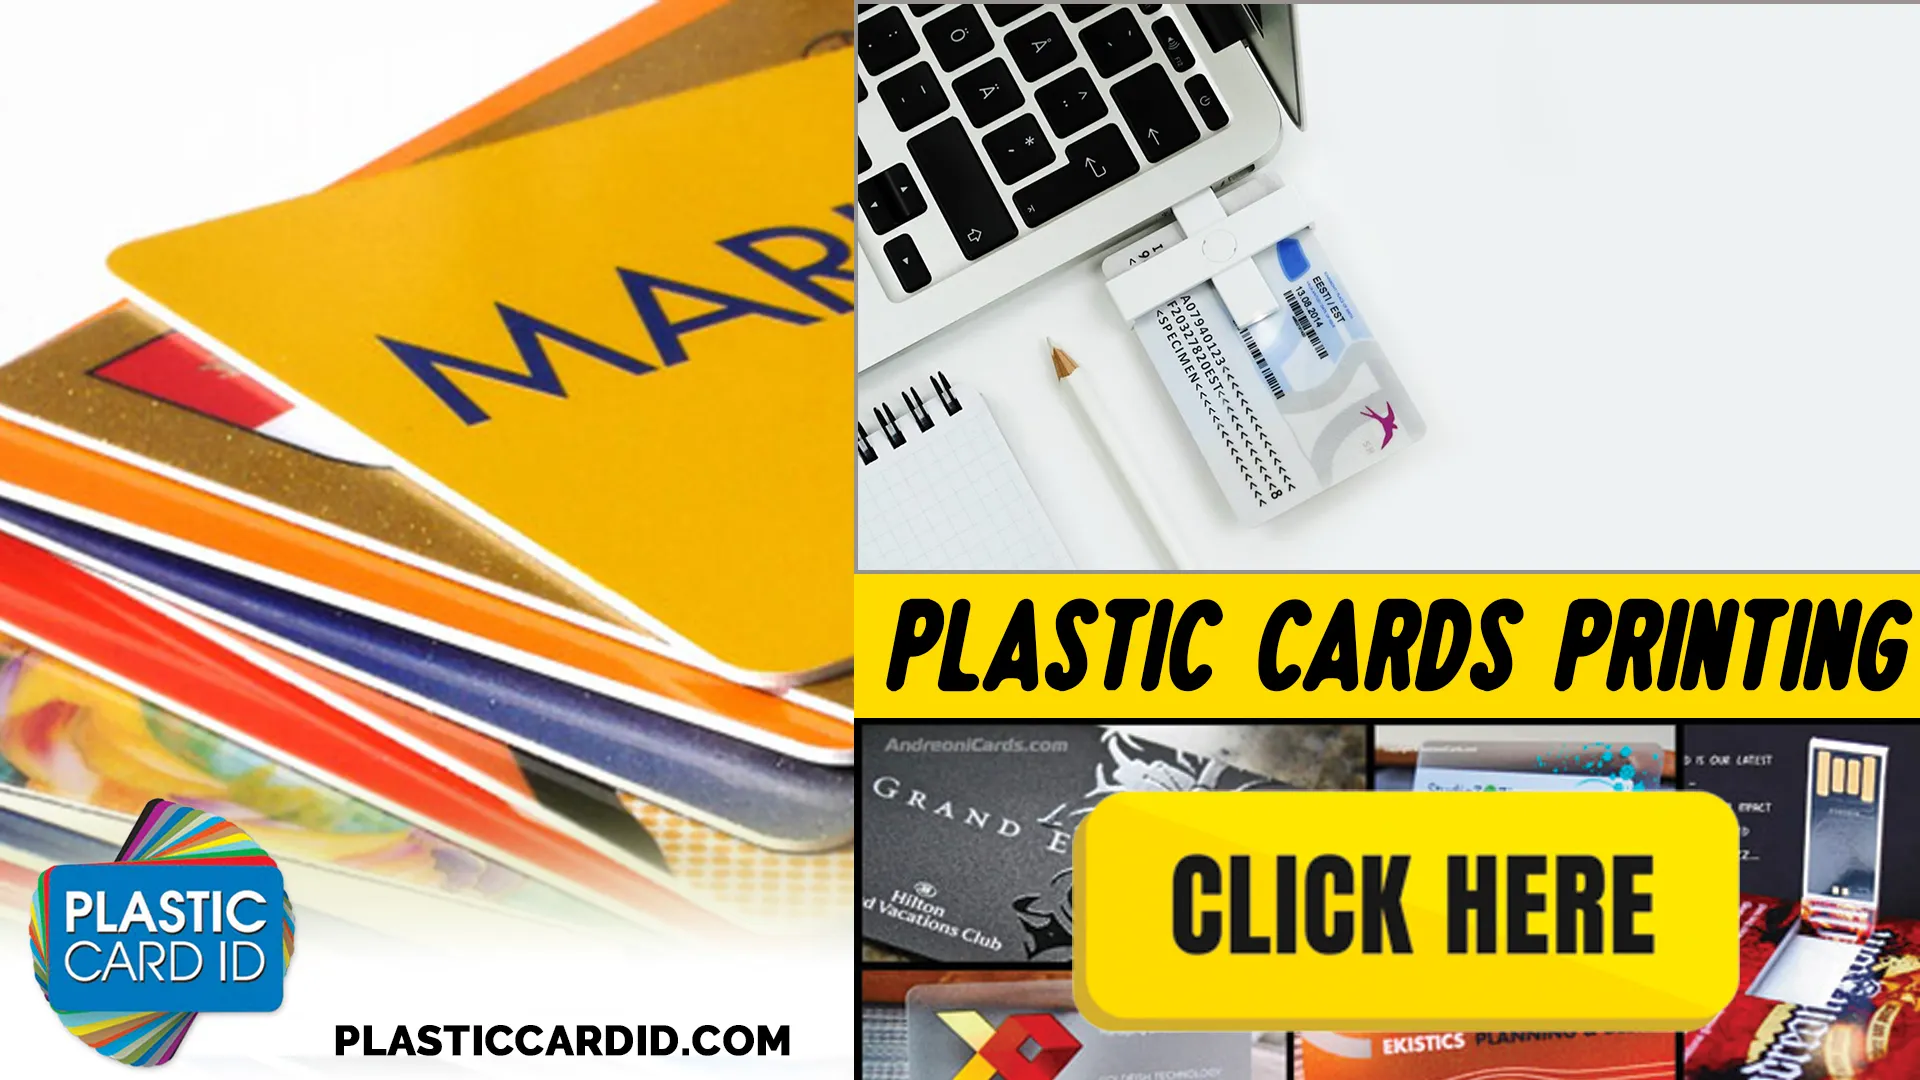 Welcome to Plastic Card ID
: Your Solution for Flawless Smart Plastic Cards